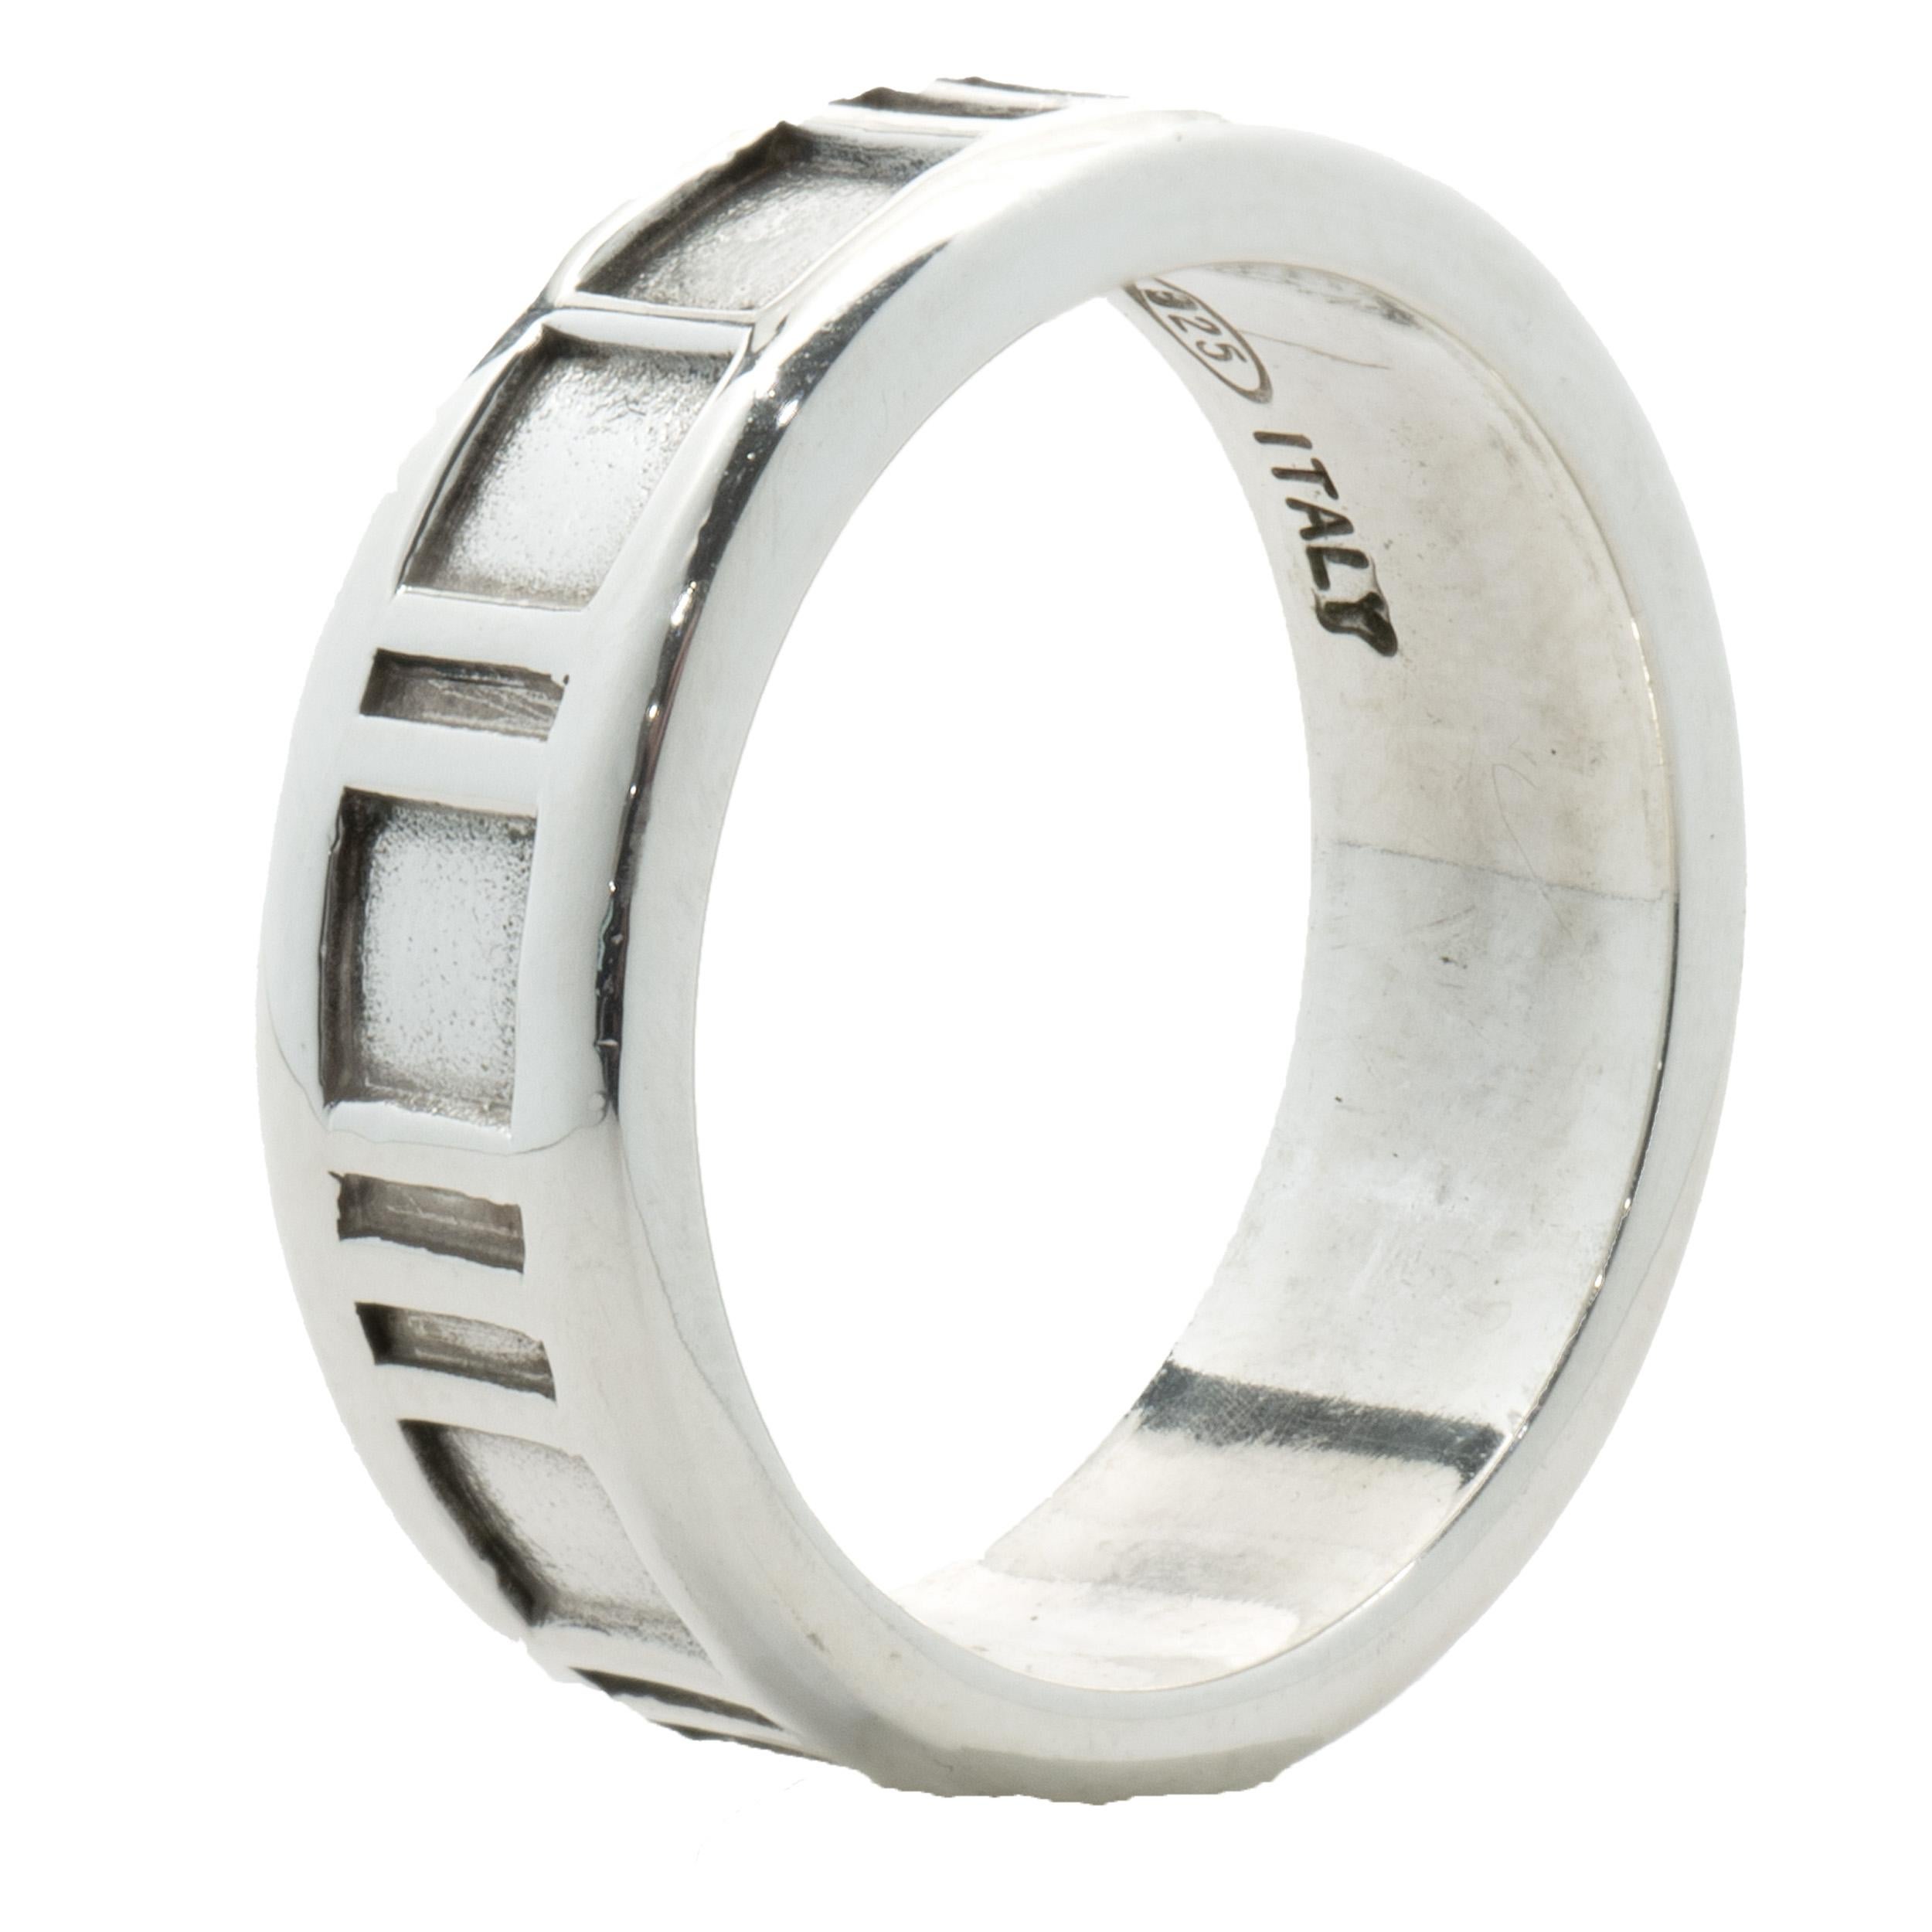 Designer: Tiffany & Co. 
Material: sterling silver
Dimensions: ring top measures 6.5mm
Weight: 6.53 grams
Size: 7